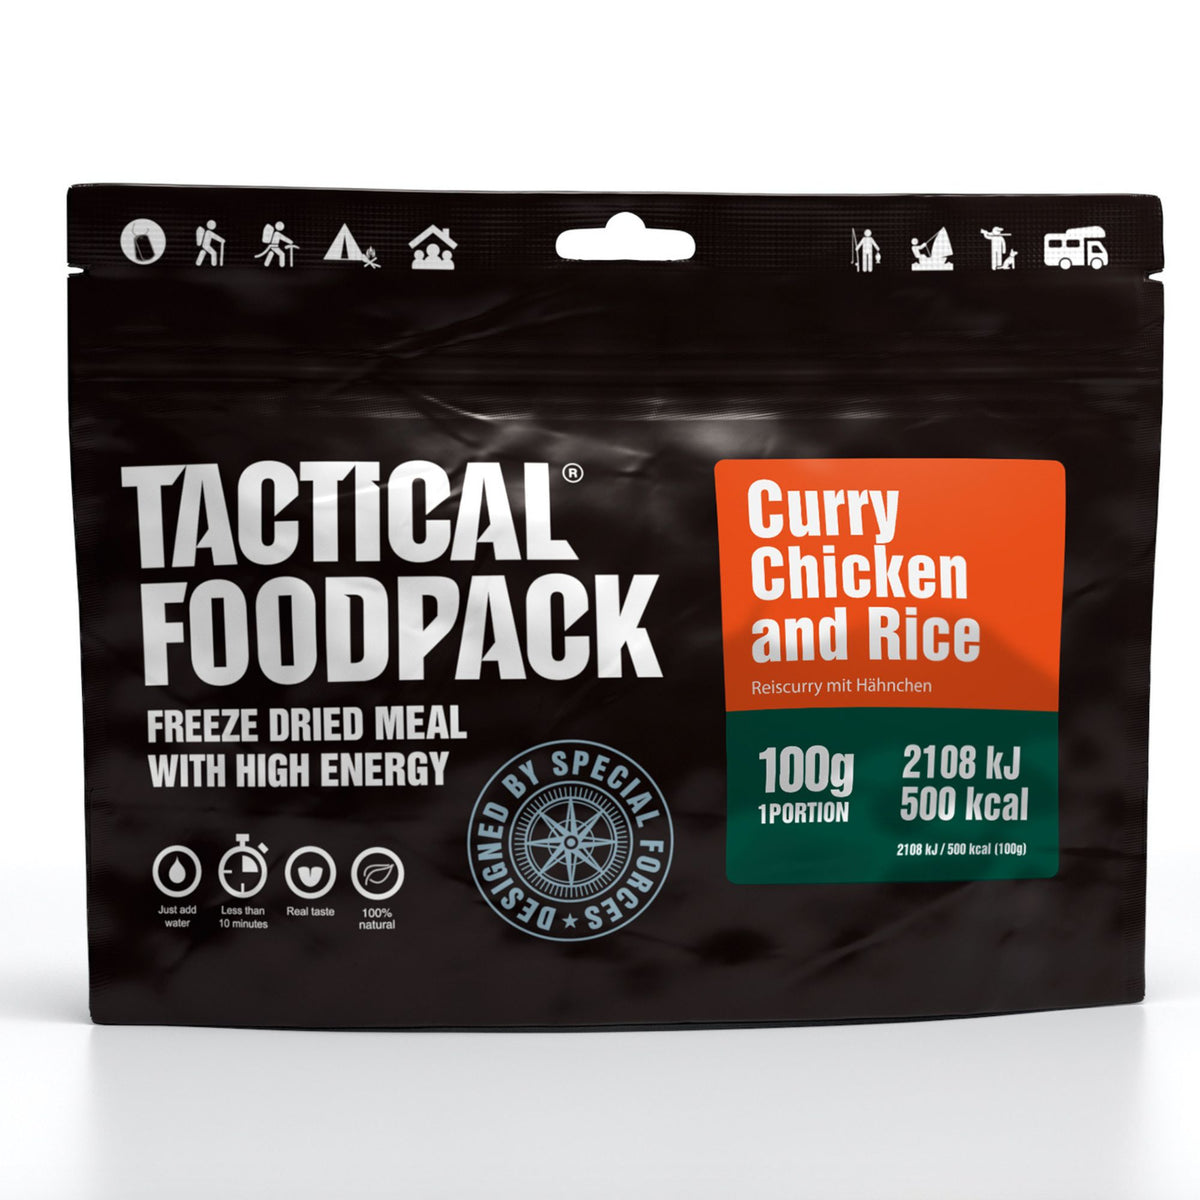 Tactical Foodpack | Curry Chicken and Rice 100g - Riso con pollo al curry